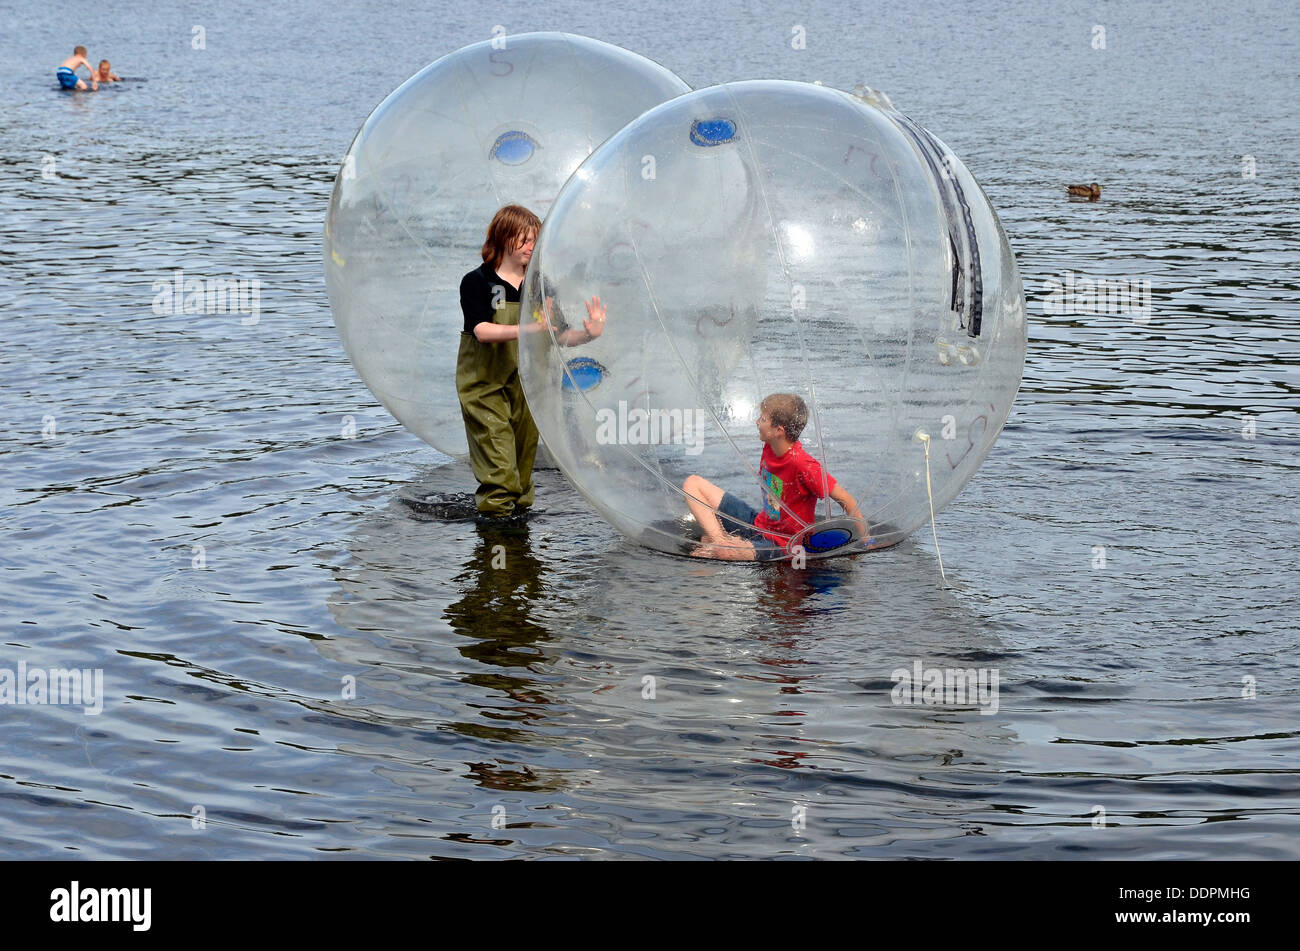 Child in a Waterwalkerz Ball under adult supervision, Coniston Water, Lake District. Stock Photo